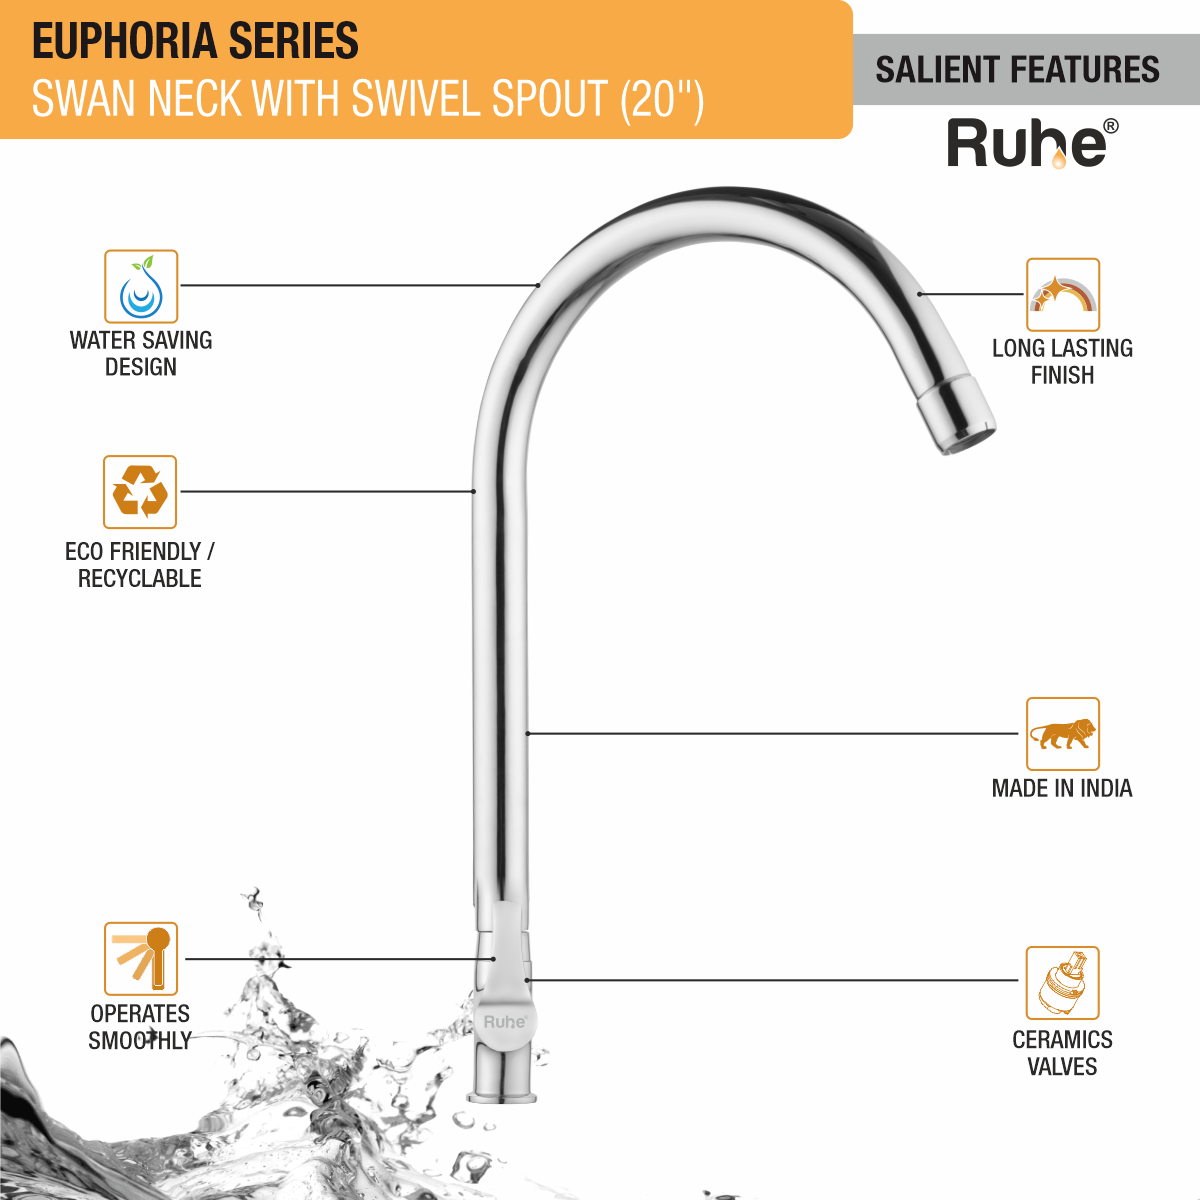 Euphoria Swan Neck with Large (20 inches) Round Swivel Spout Faucet features